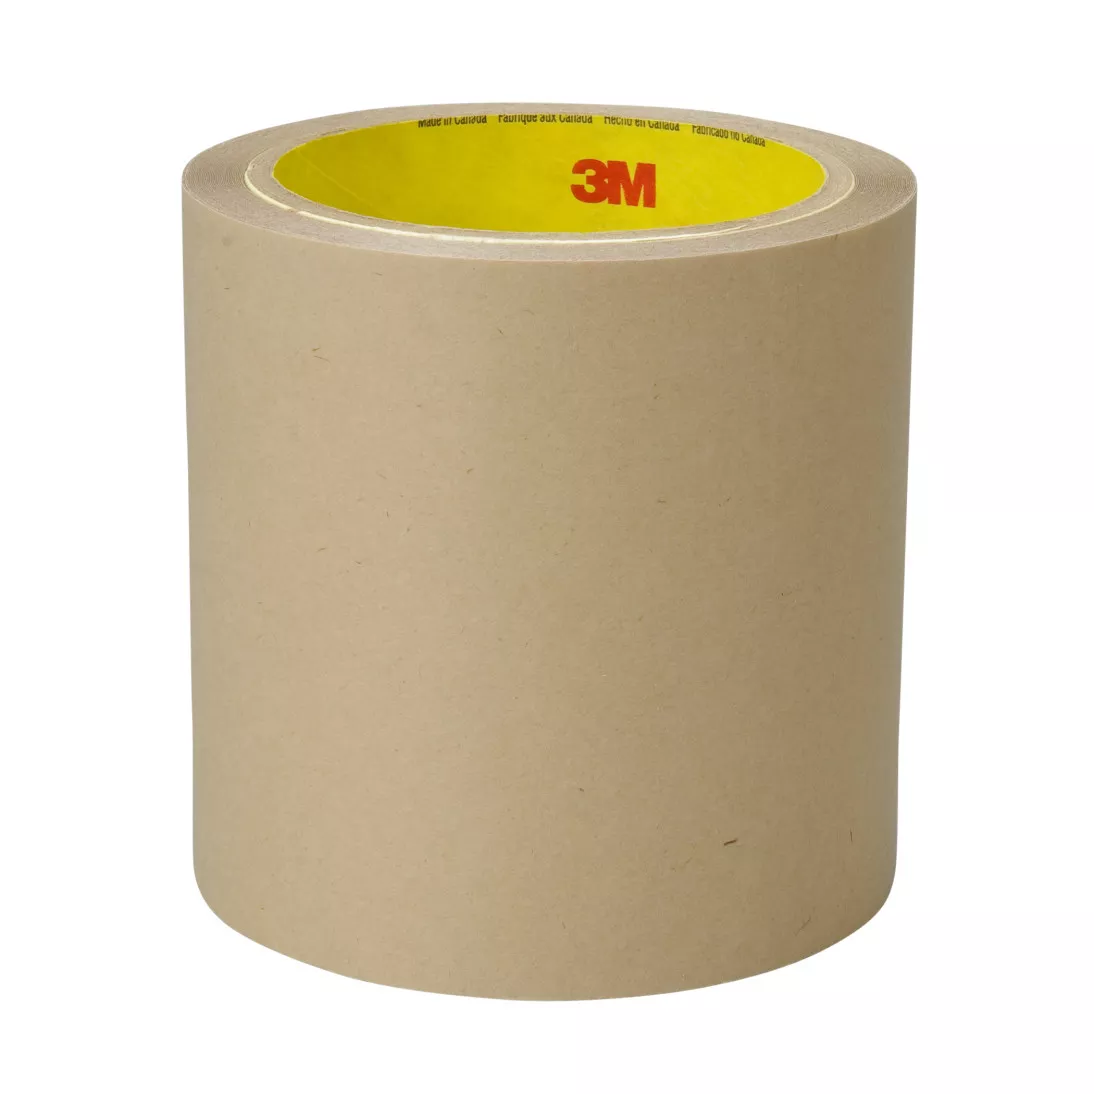 3M™ Adhesive Transfer Tape 966NP, Clear, 48 in x 60 yd, 2.3 mil, 1 roll
per case